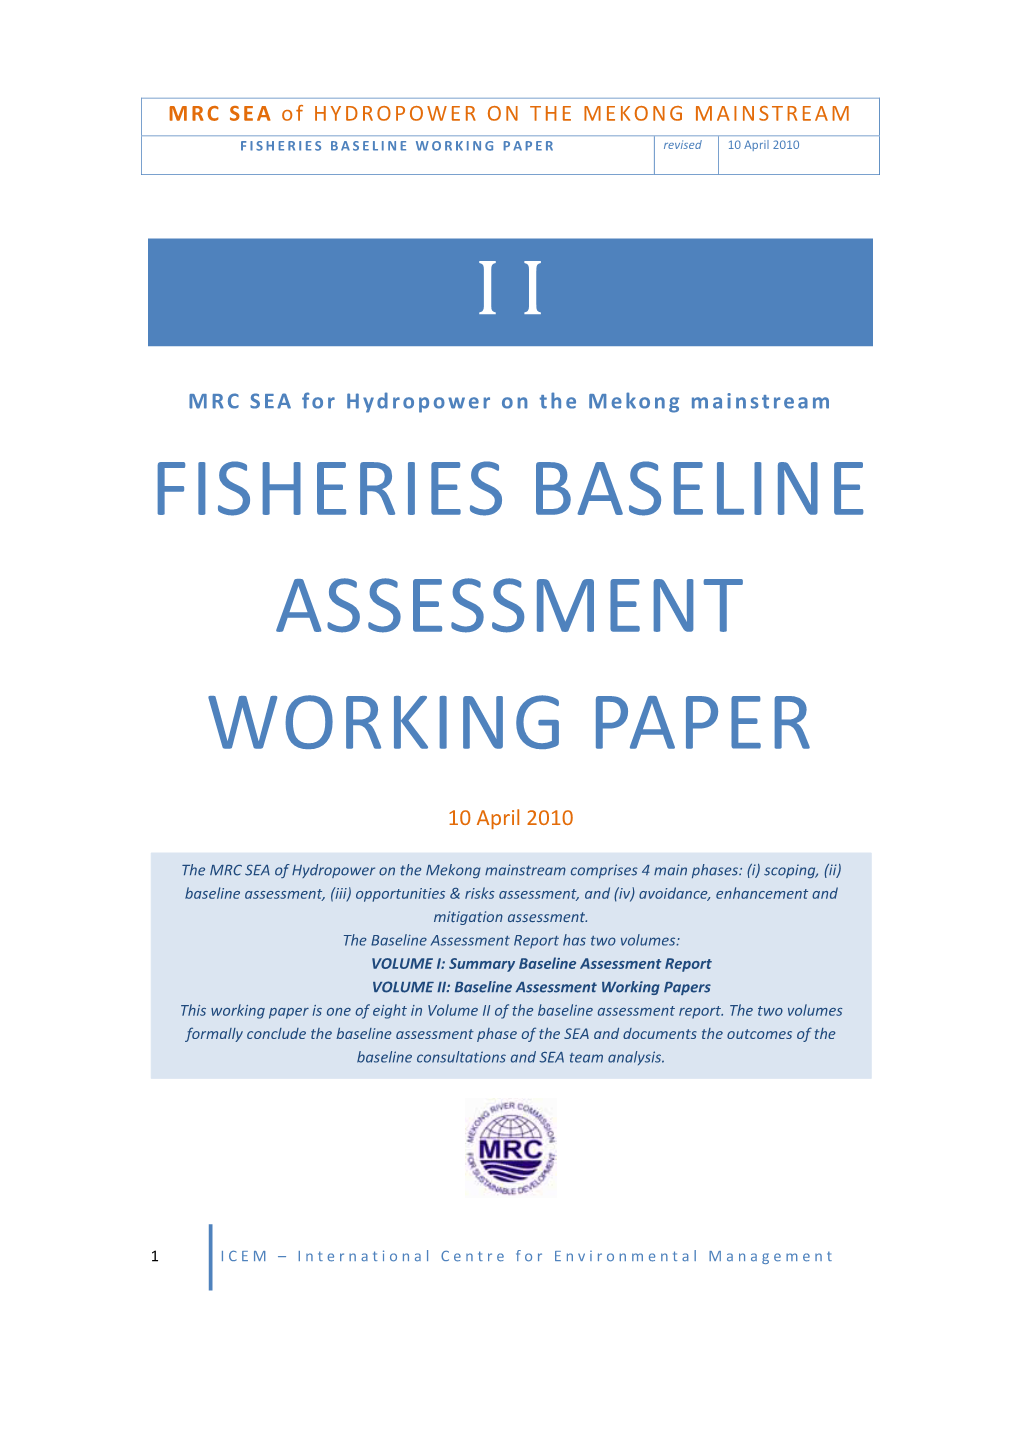 Fisheries Baseline Assessment Working Paper